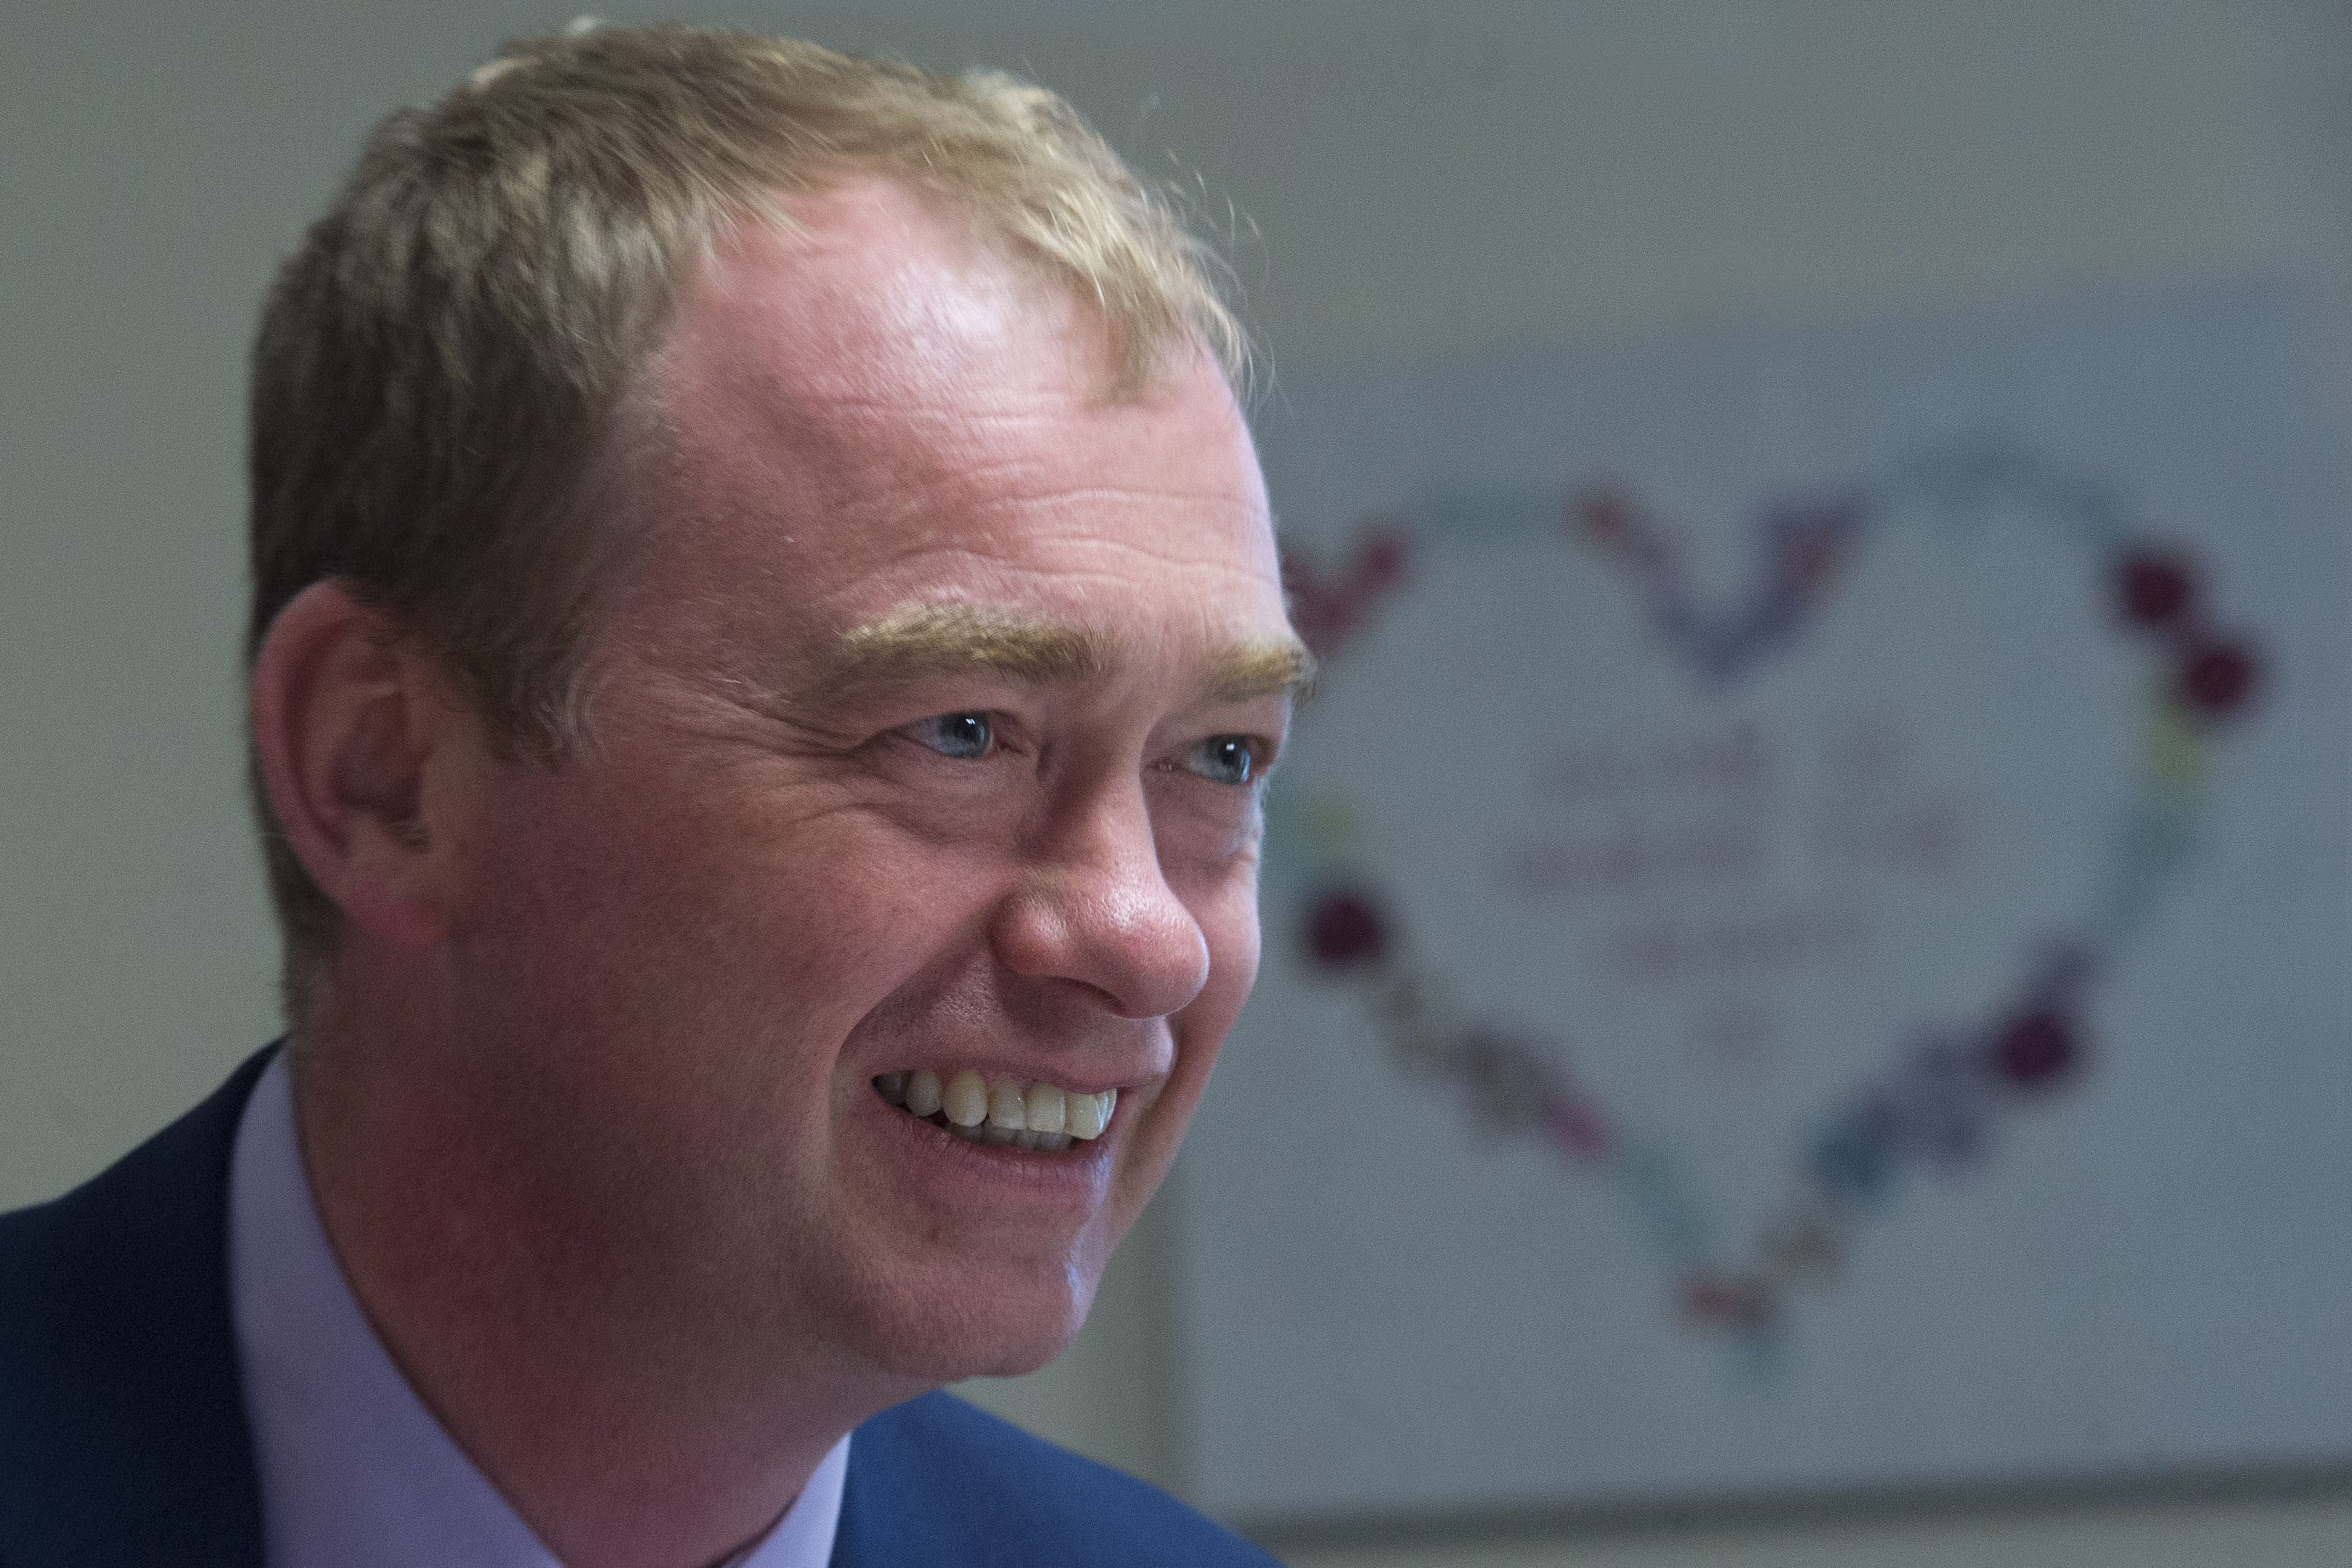 Liberal Democrats leader Tim Farron during a visit to the Rosebank Care Home for people with learning difficulties in Southport on the General Election campaign trail. (Victoria Jones/PA Wire)